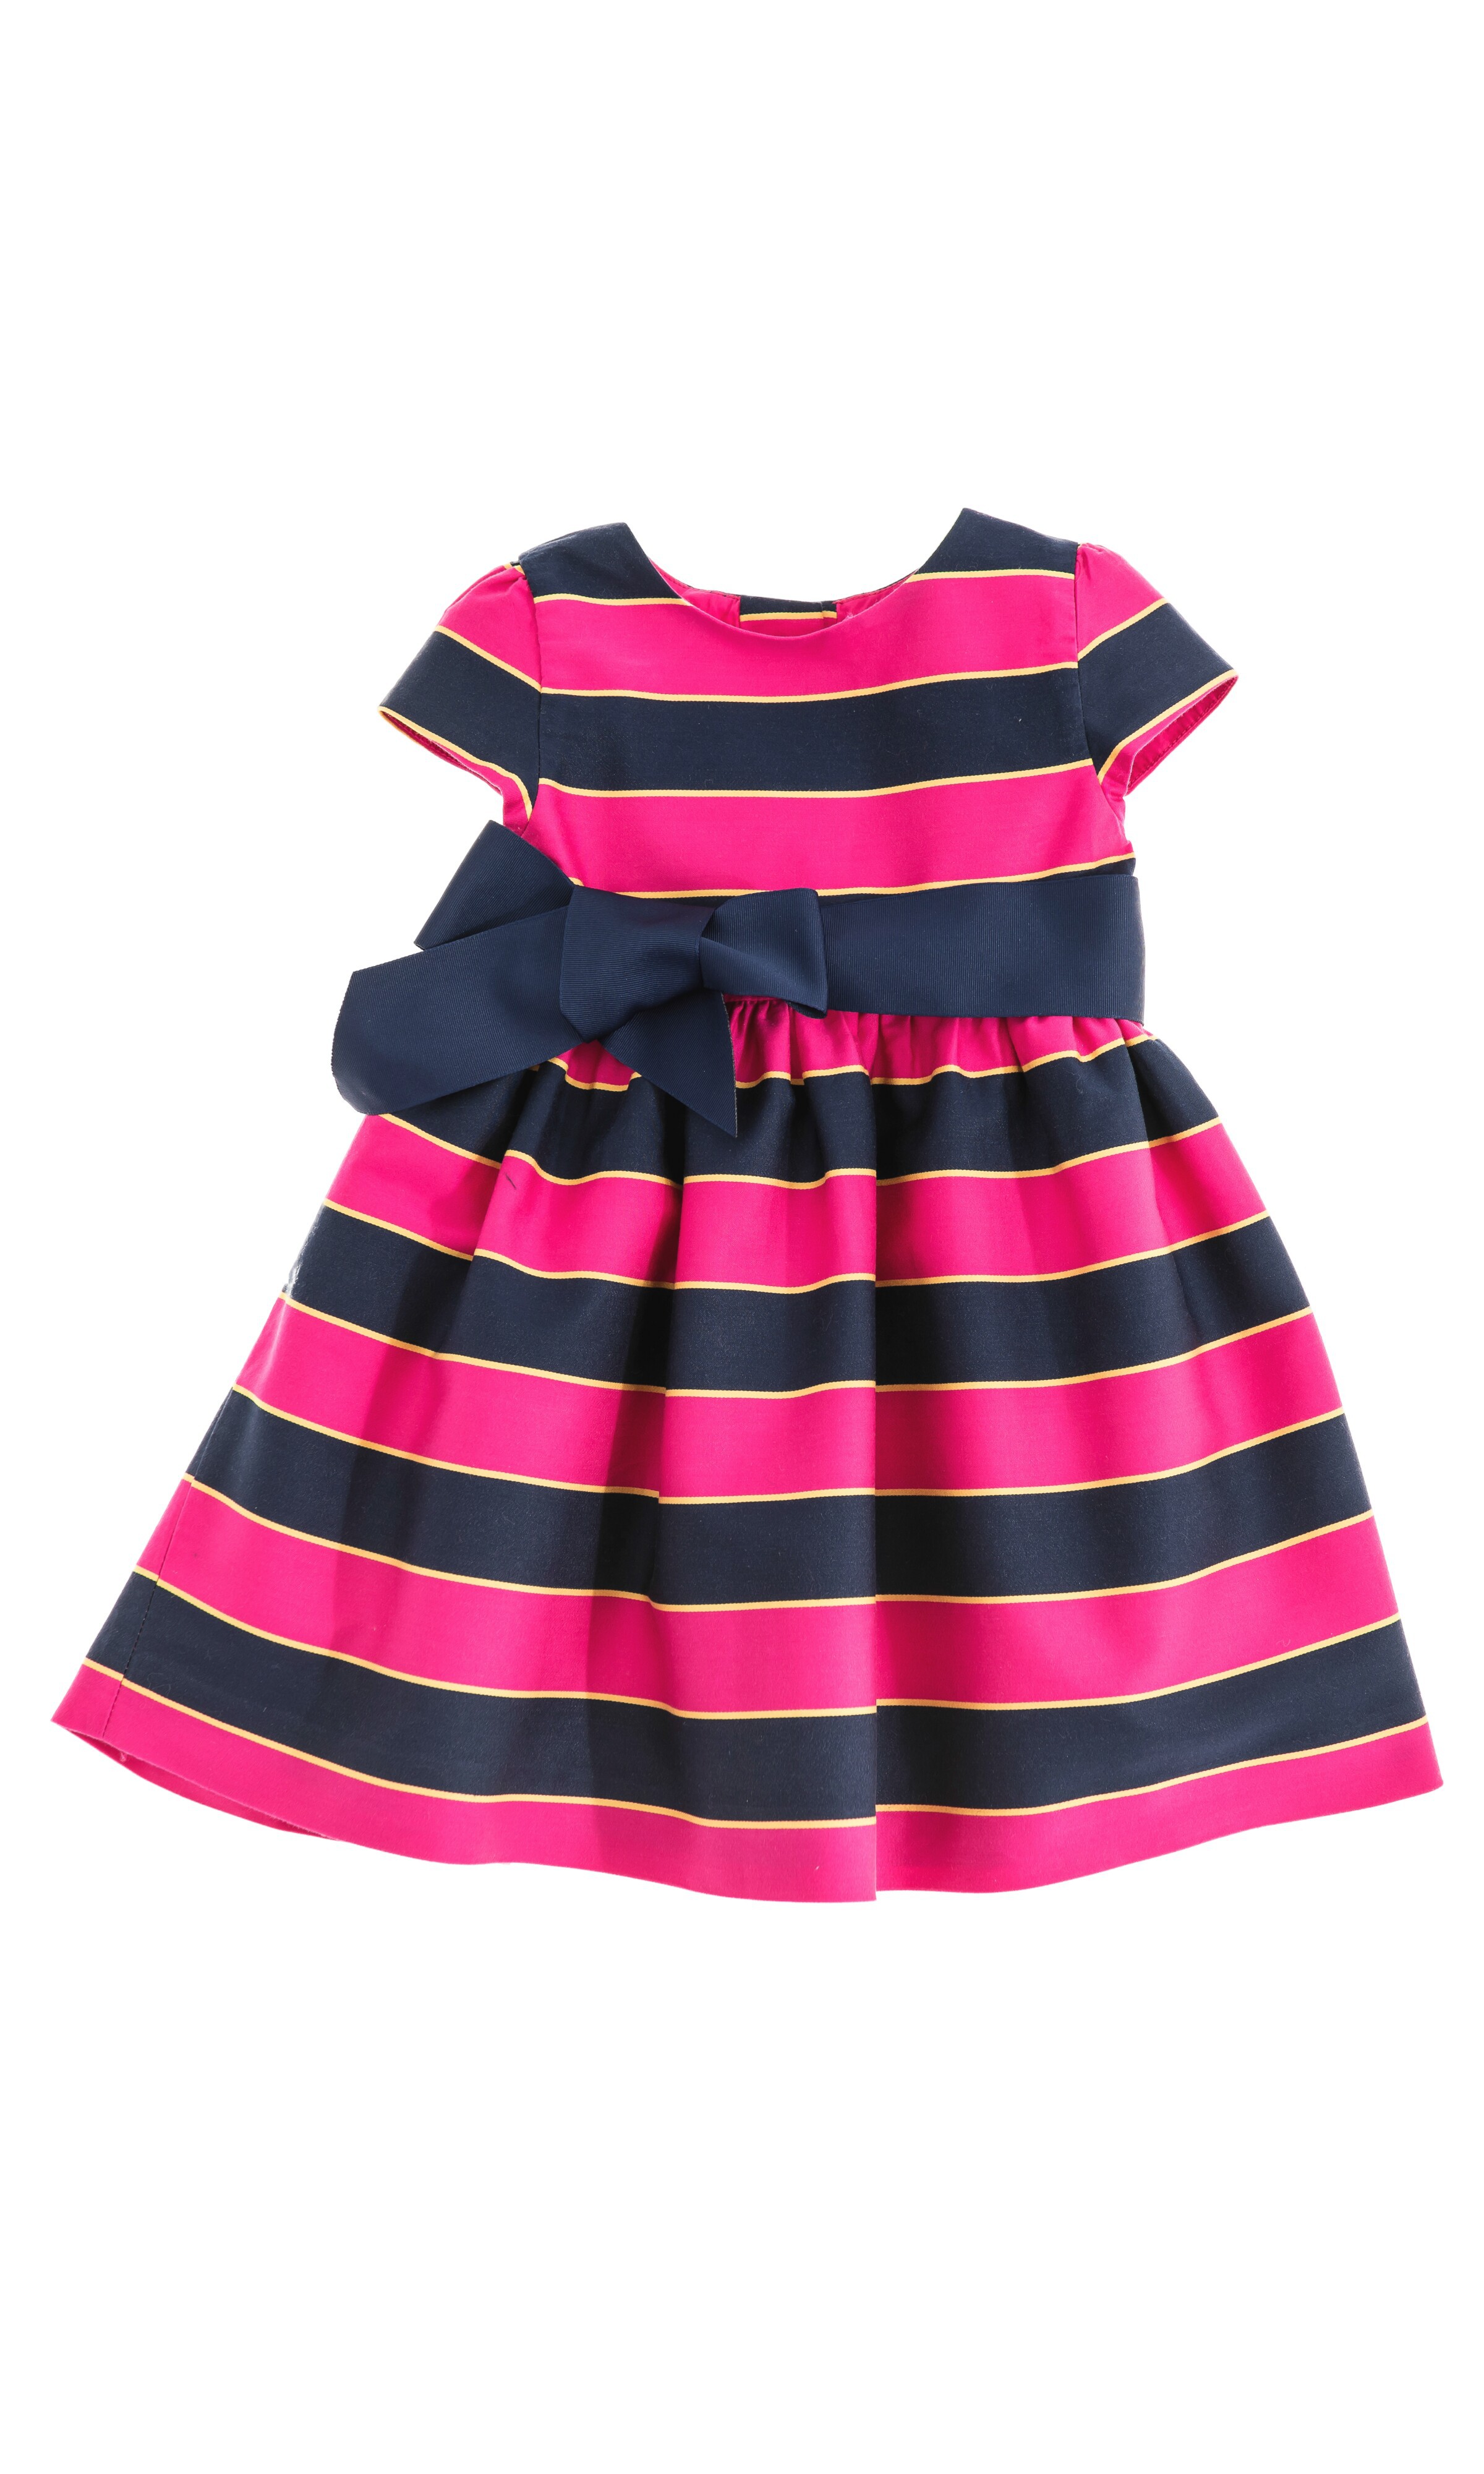 Pink-and-navy blue striped dress, Polo Ralph Lauren - Celebrity Club